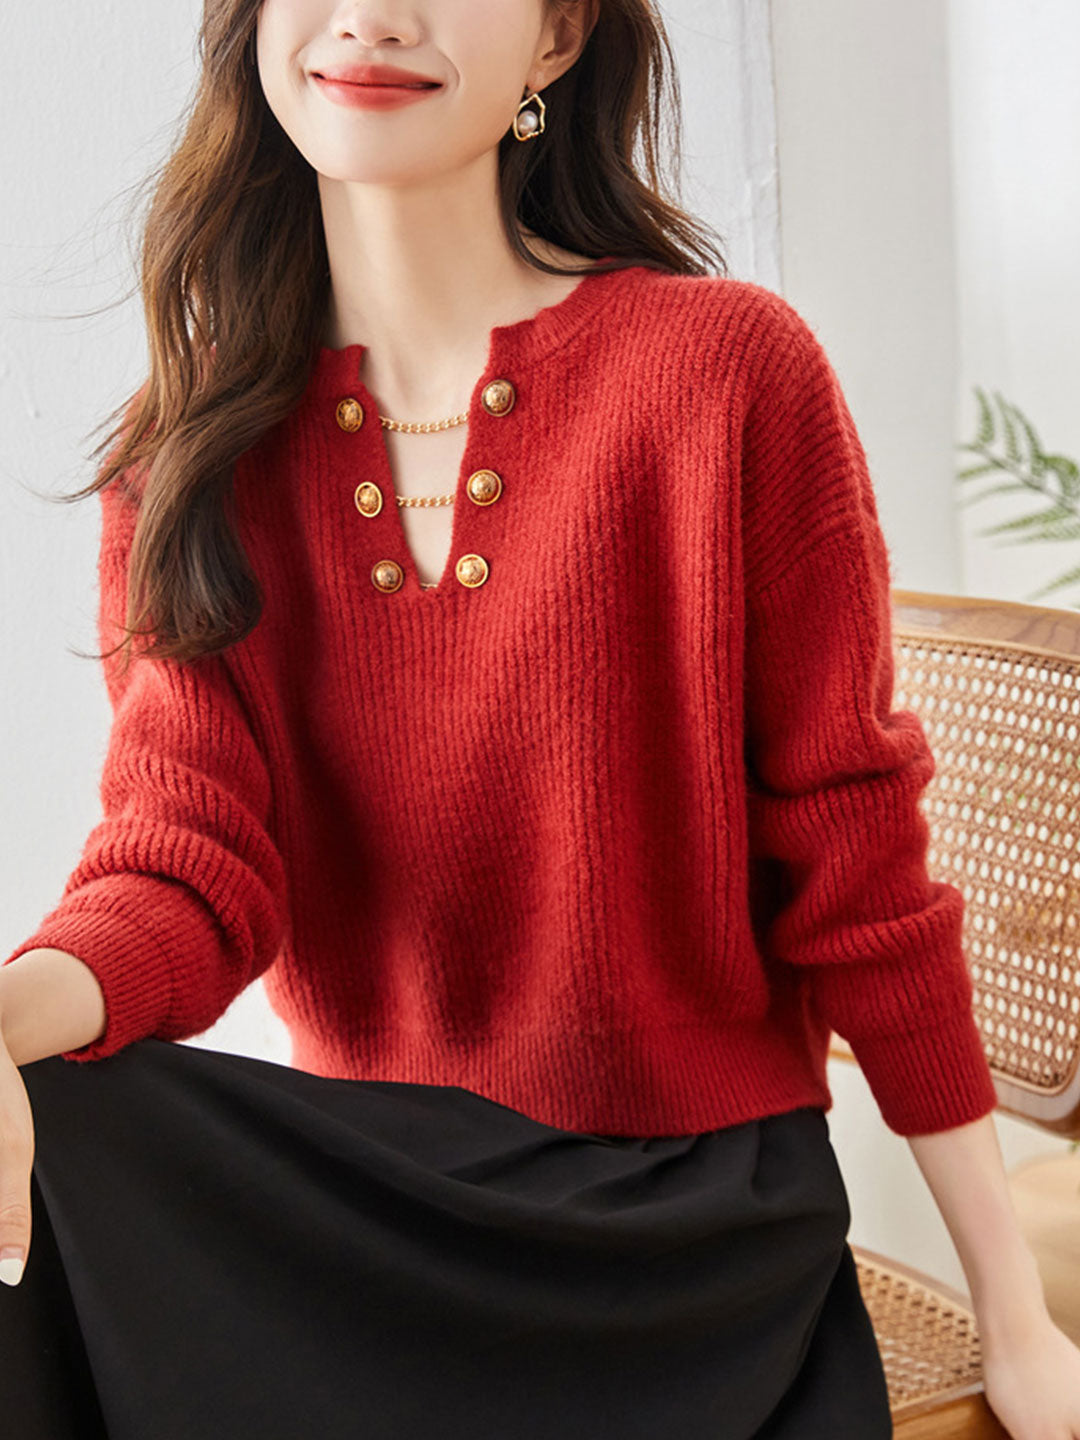 Lauren Retro Chain Pullover Knitted Sweater